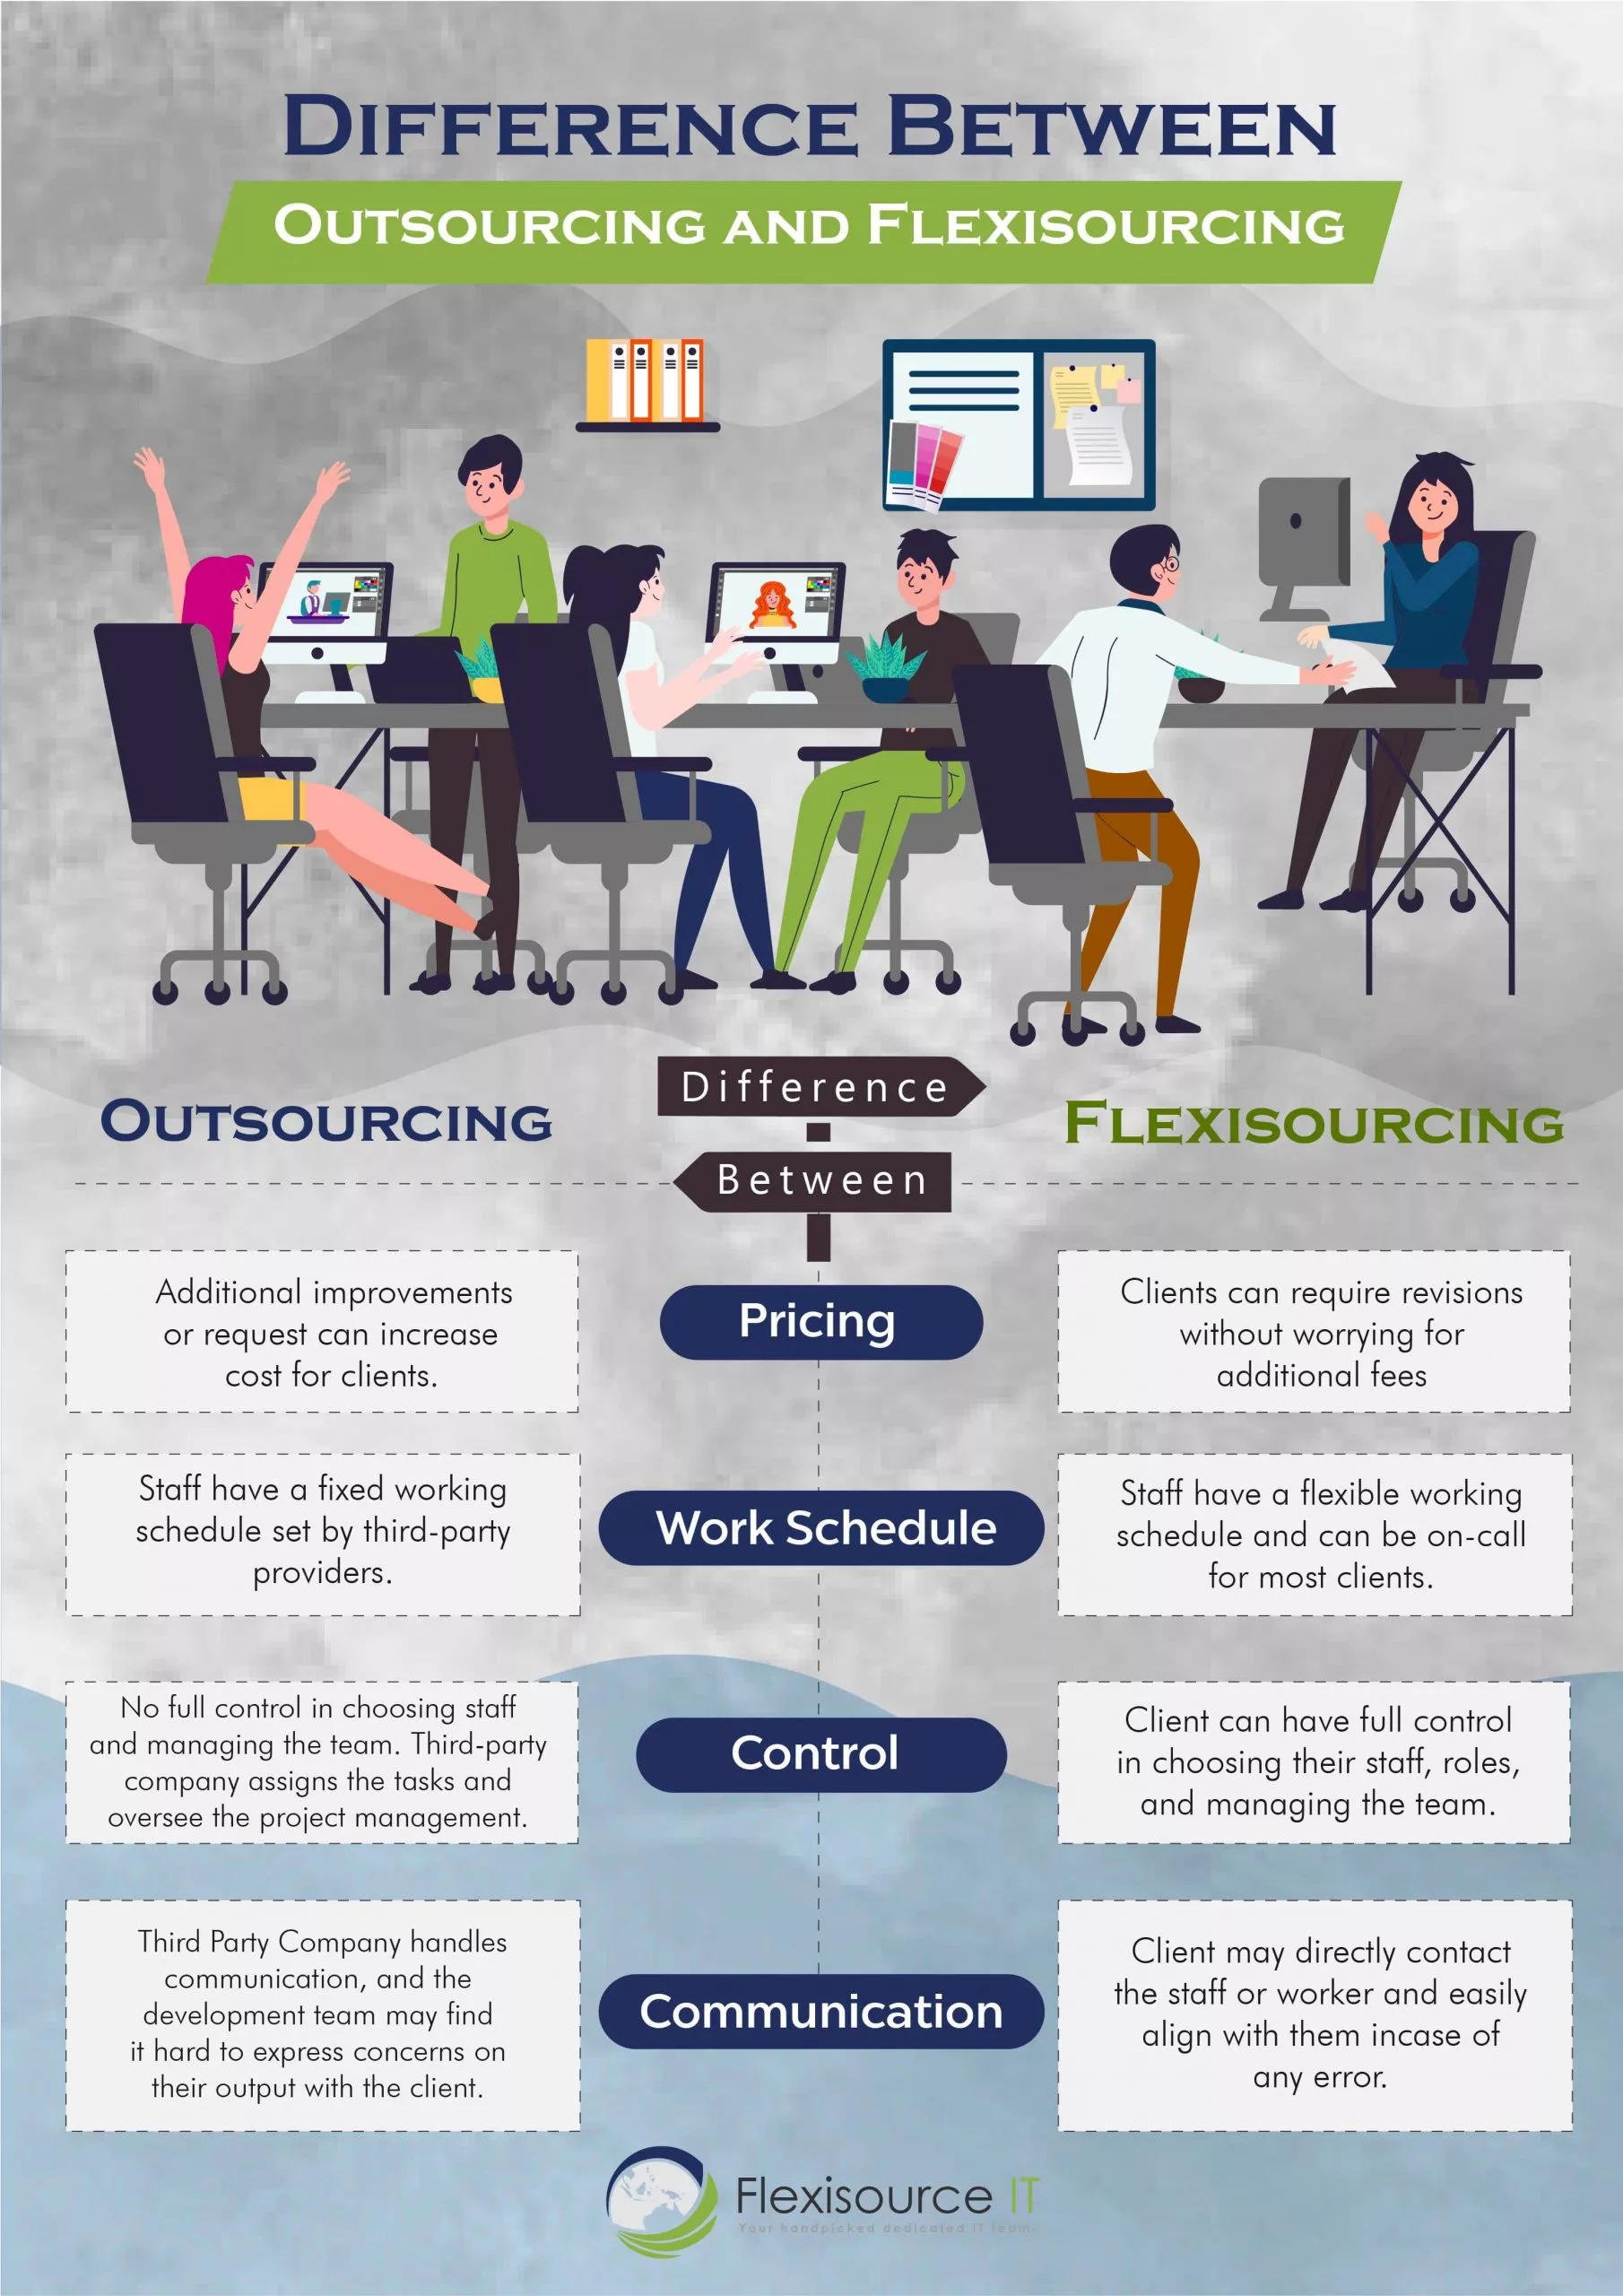 flexisourcing-vs-outsourcing-infographic